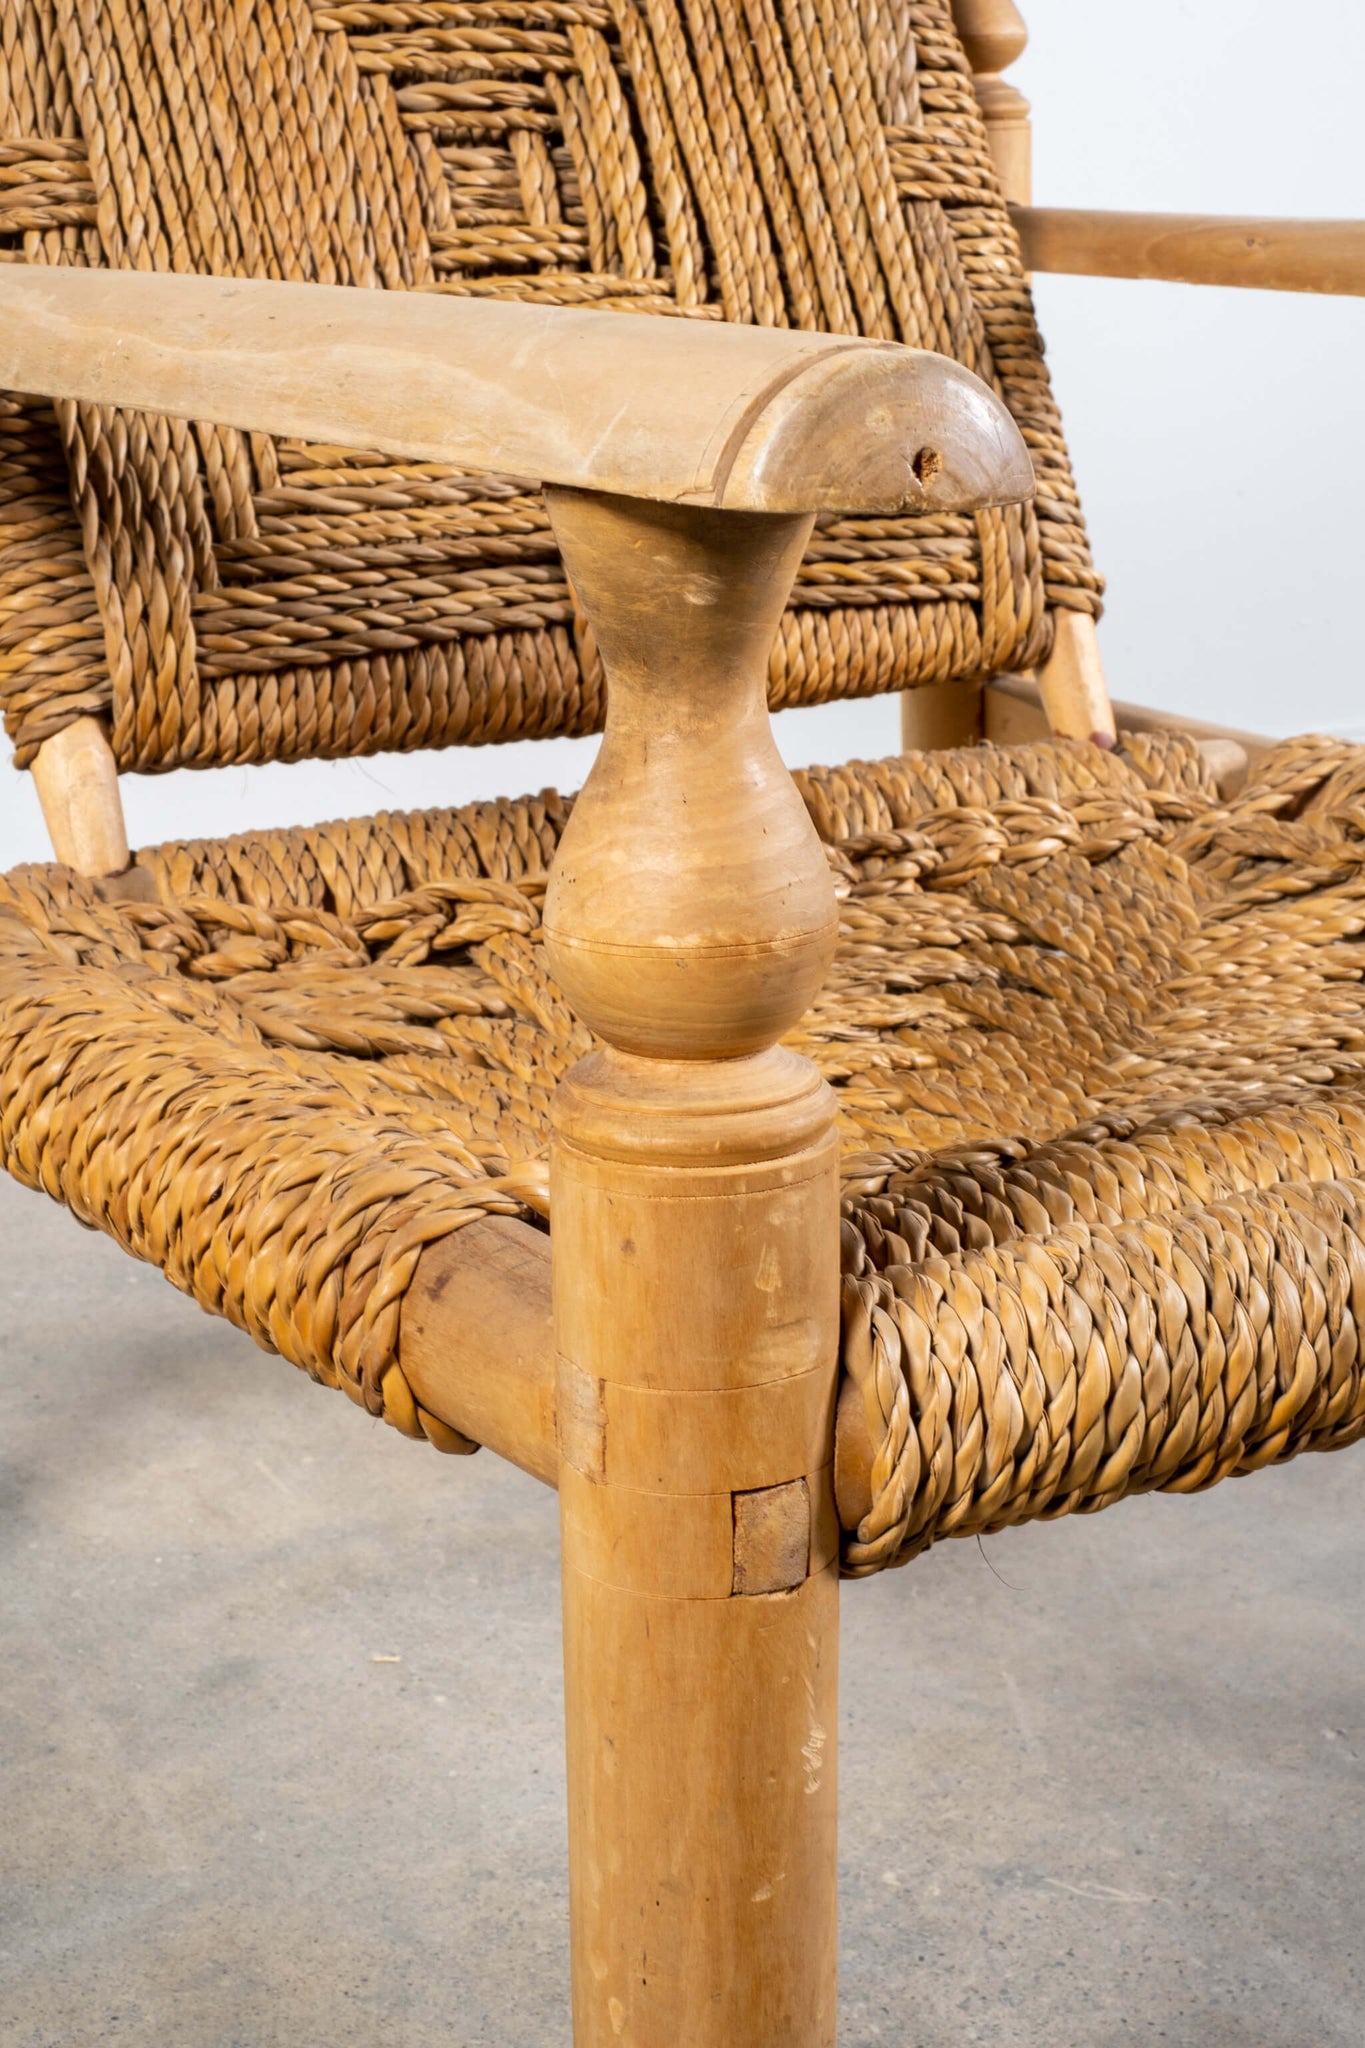 Vintage French Wood and Rope Armchairs with Footstools Adrien Audoux and Frida Minet, armrest detail view